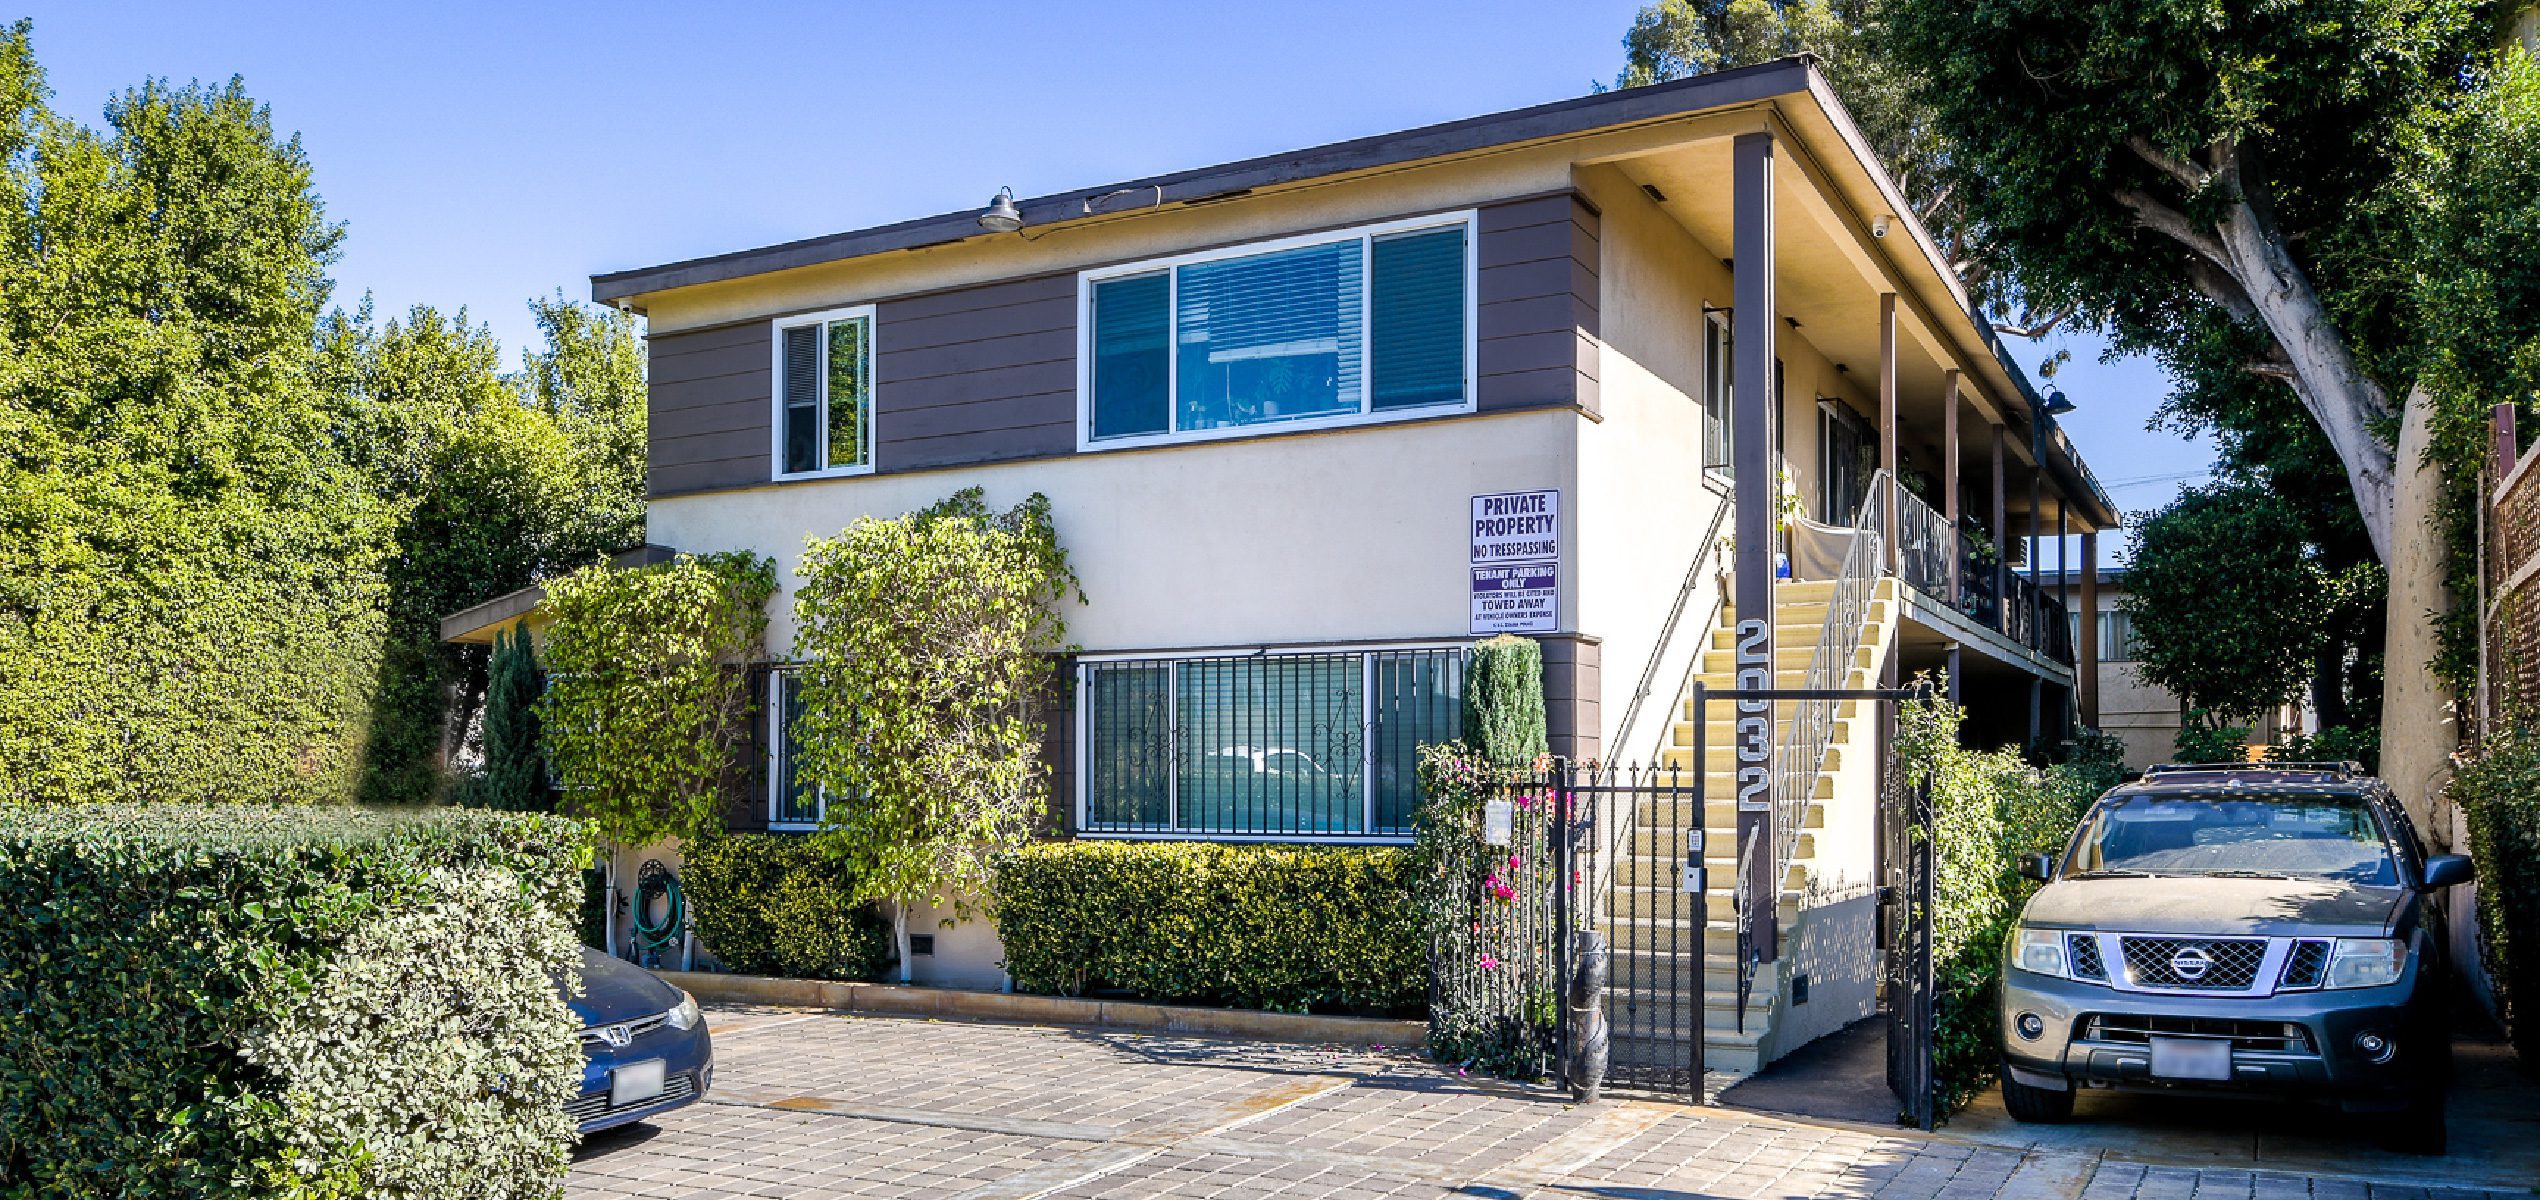 Exterior of 2032 Shenadoah, a multifamily proeprty in Pico-Robertson